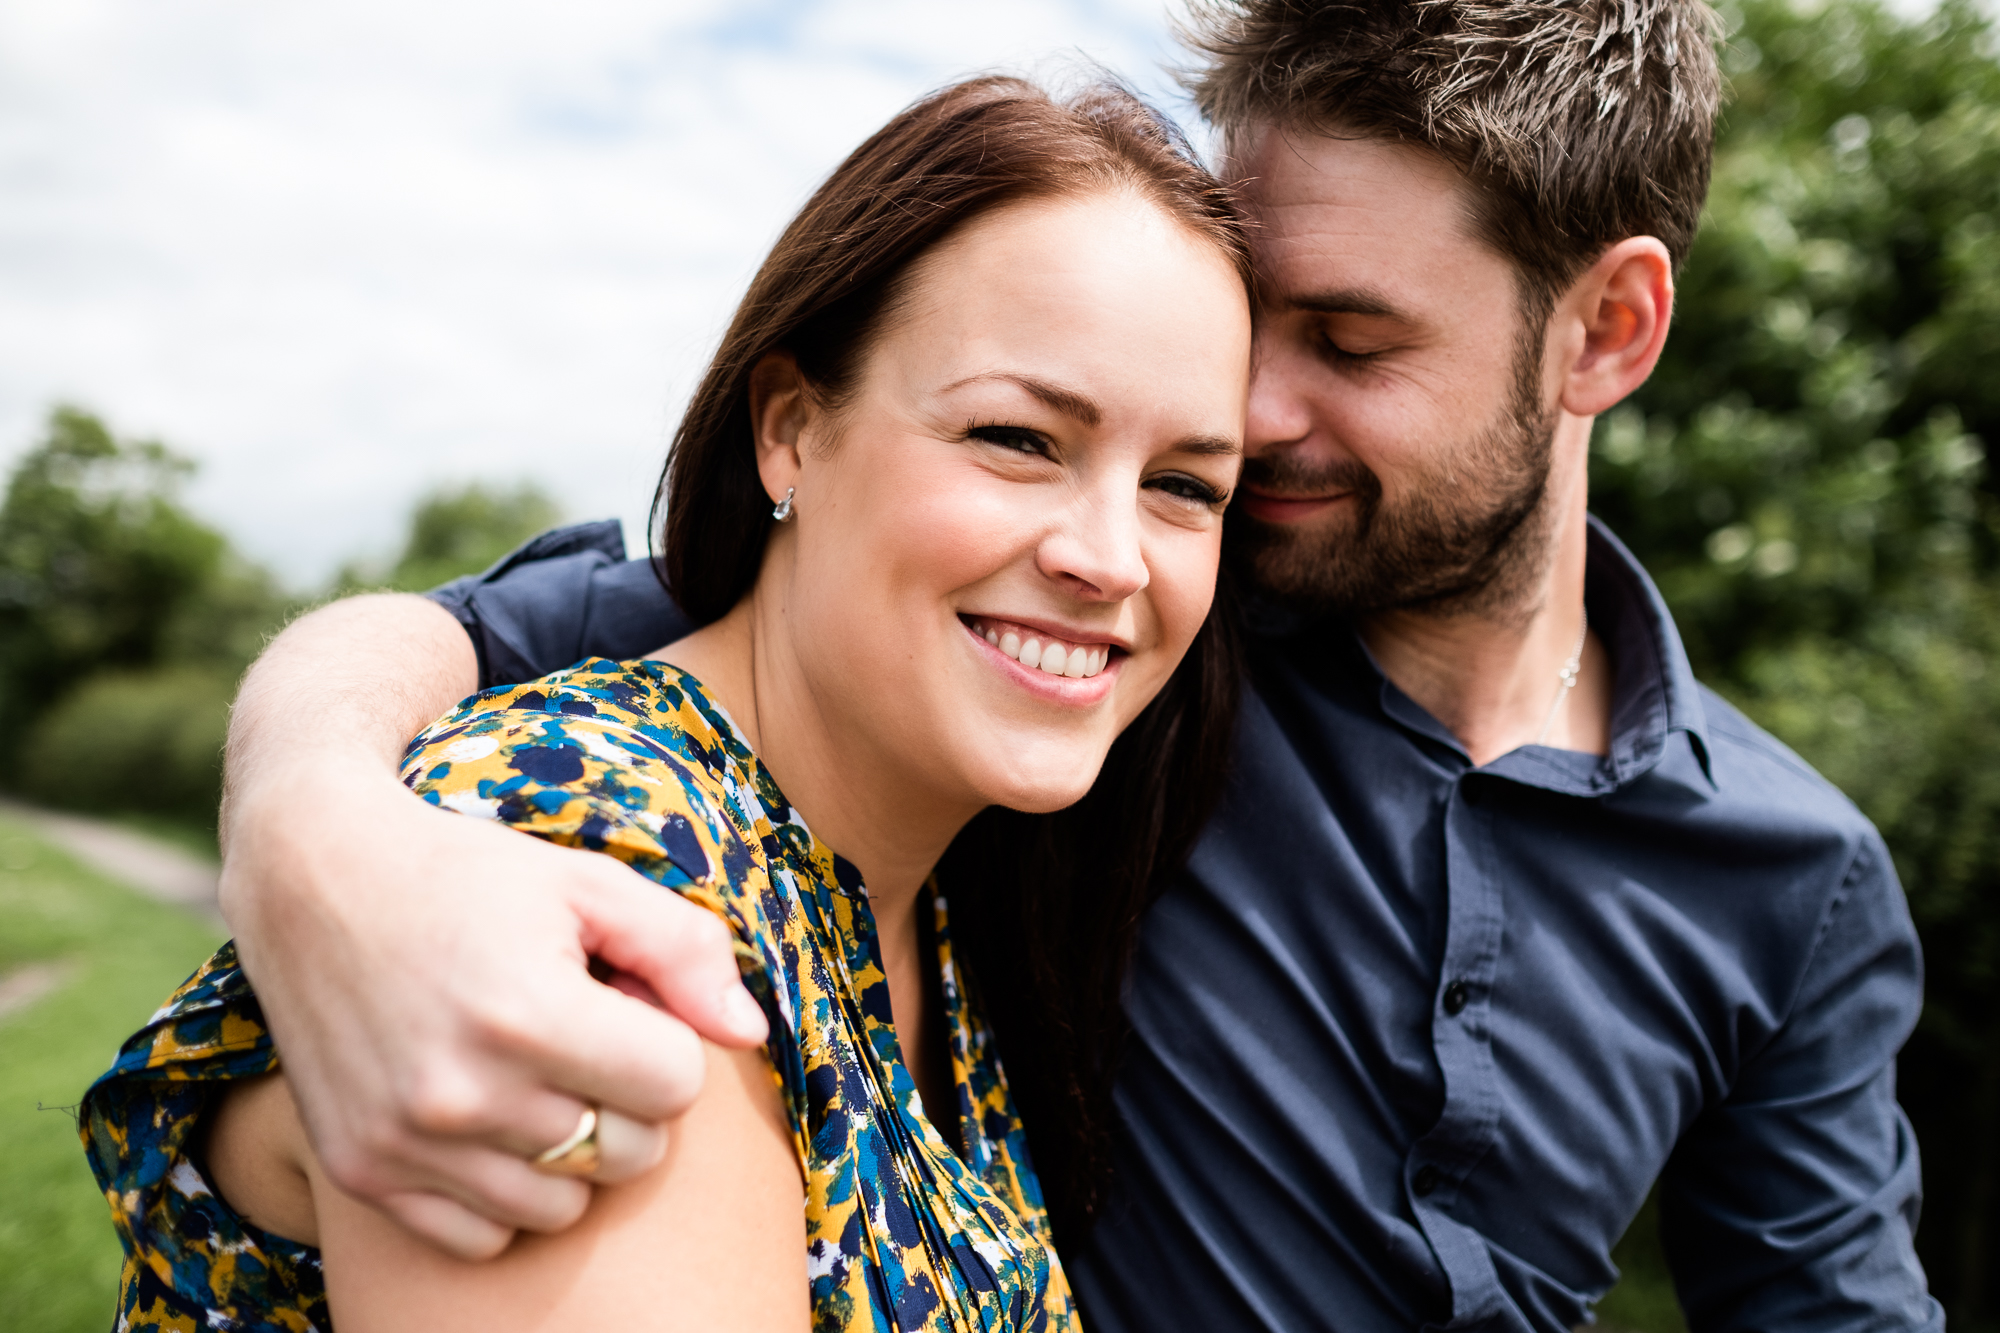 Pre-Wedding Session Engagement Photos Couple Shoot English countryside Canal - Jenny Harper Photography-11.jpg